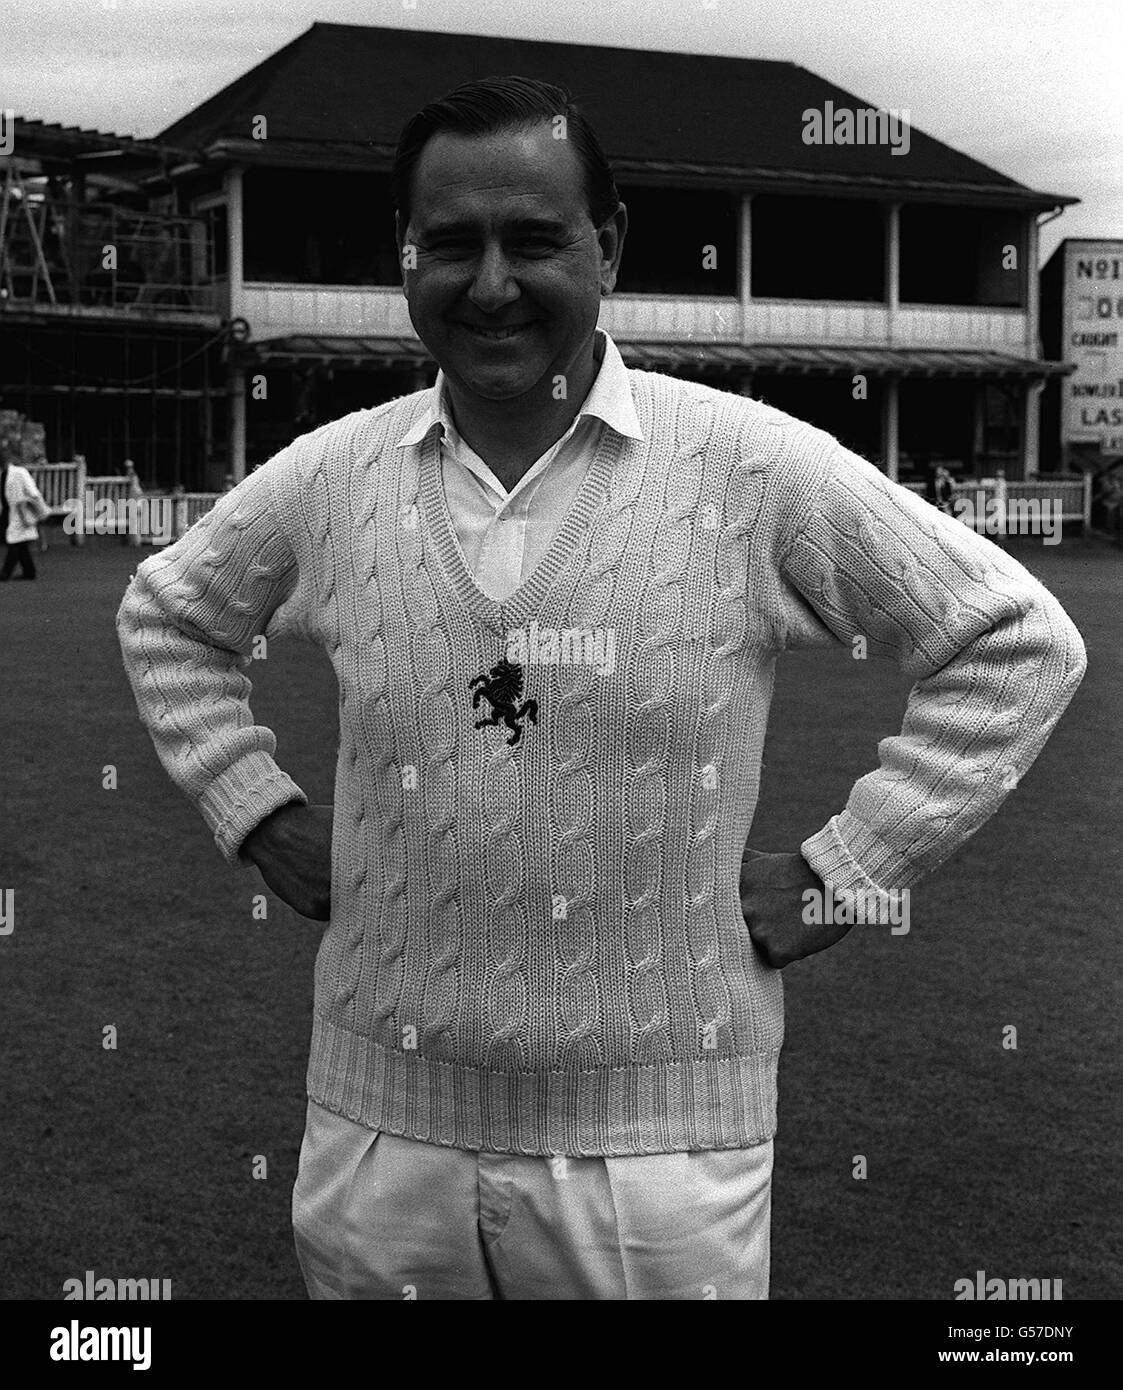 COLIN COWDREY 1969: A picture of the Kent cricket captain, Colin Cowdrey, England's recent Test match skipper. He may lead England in the coming series against the West Indies. Stock Photo